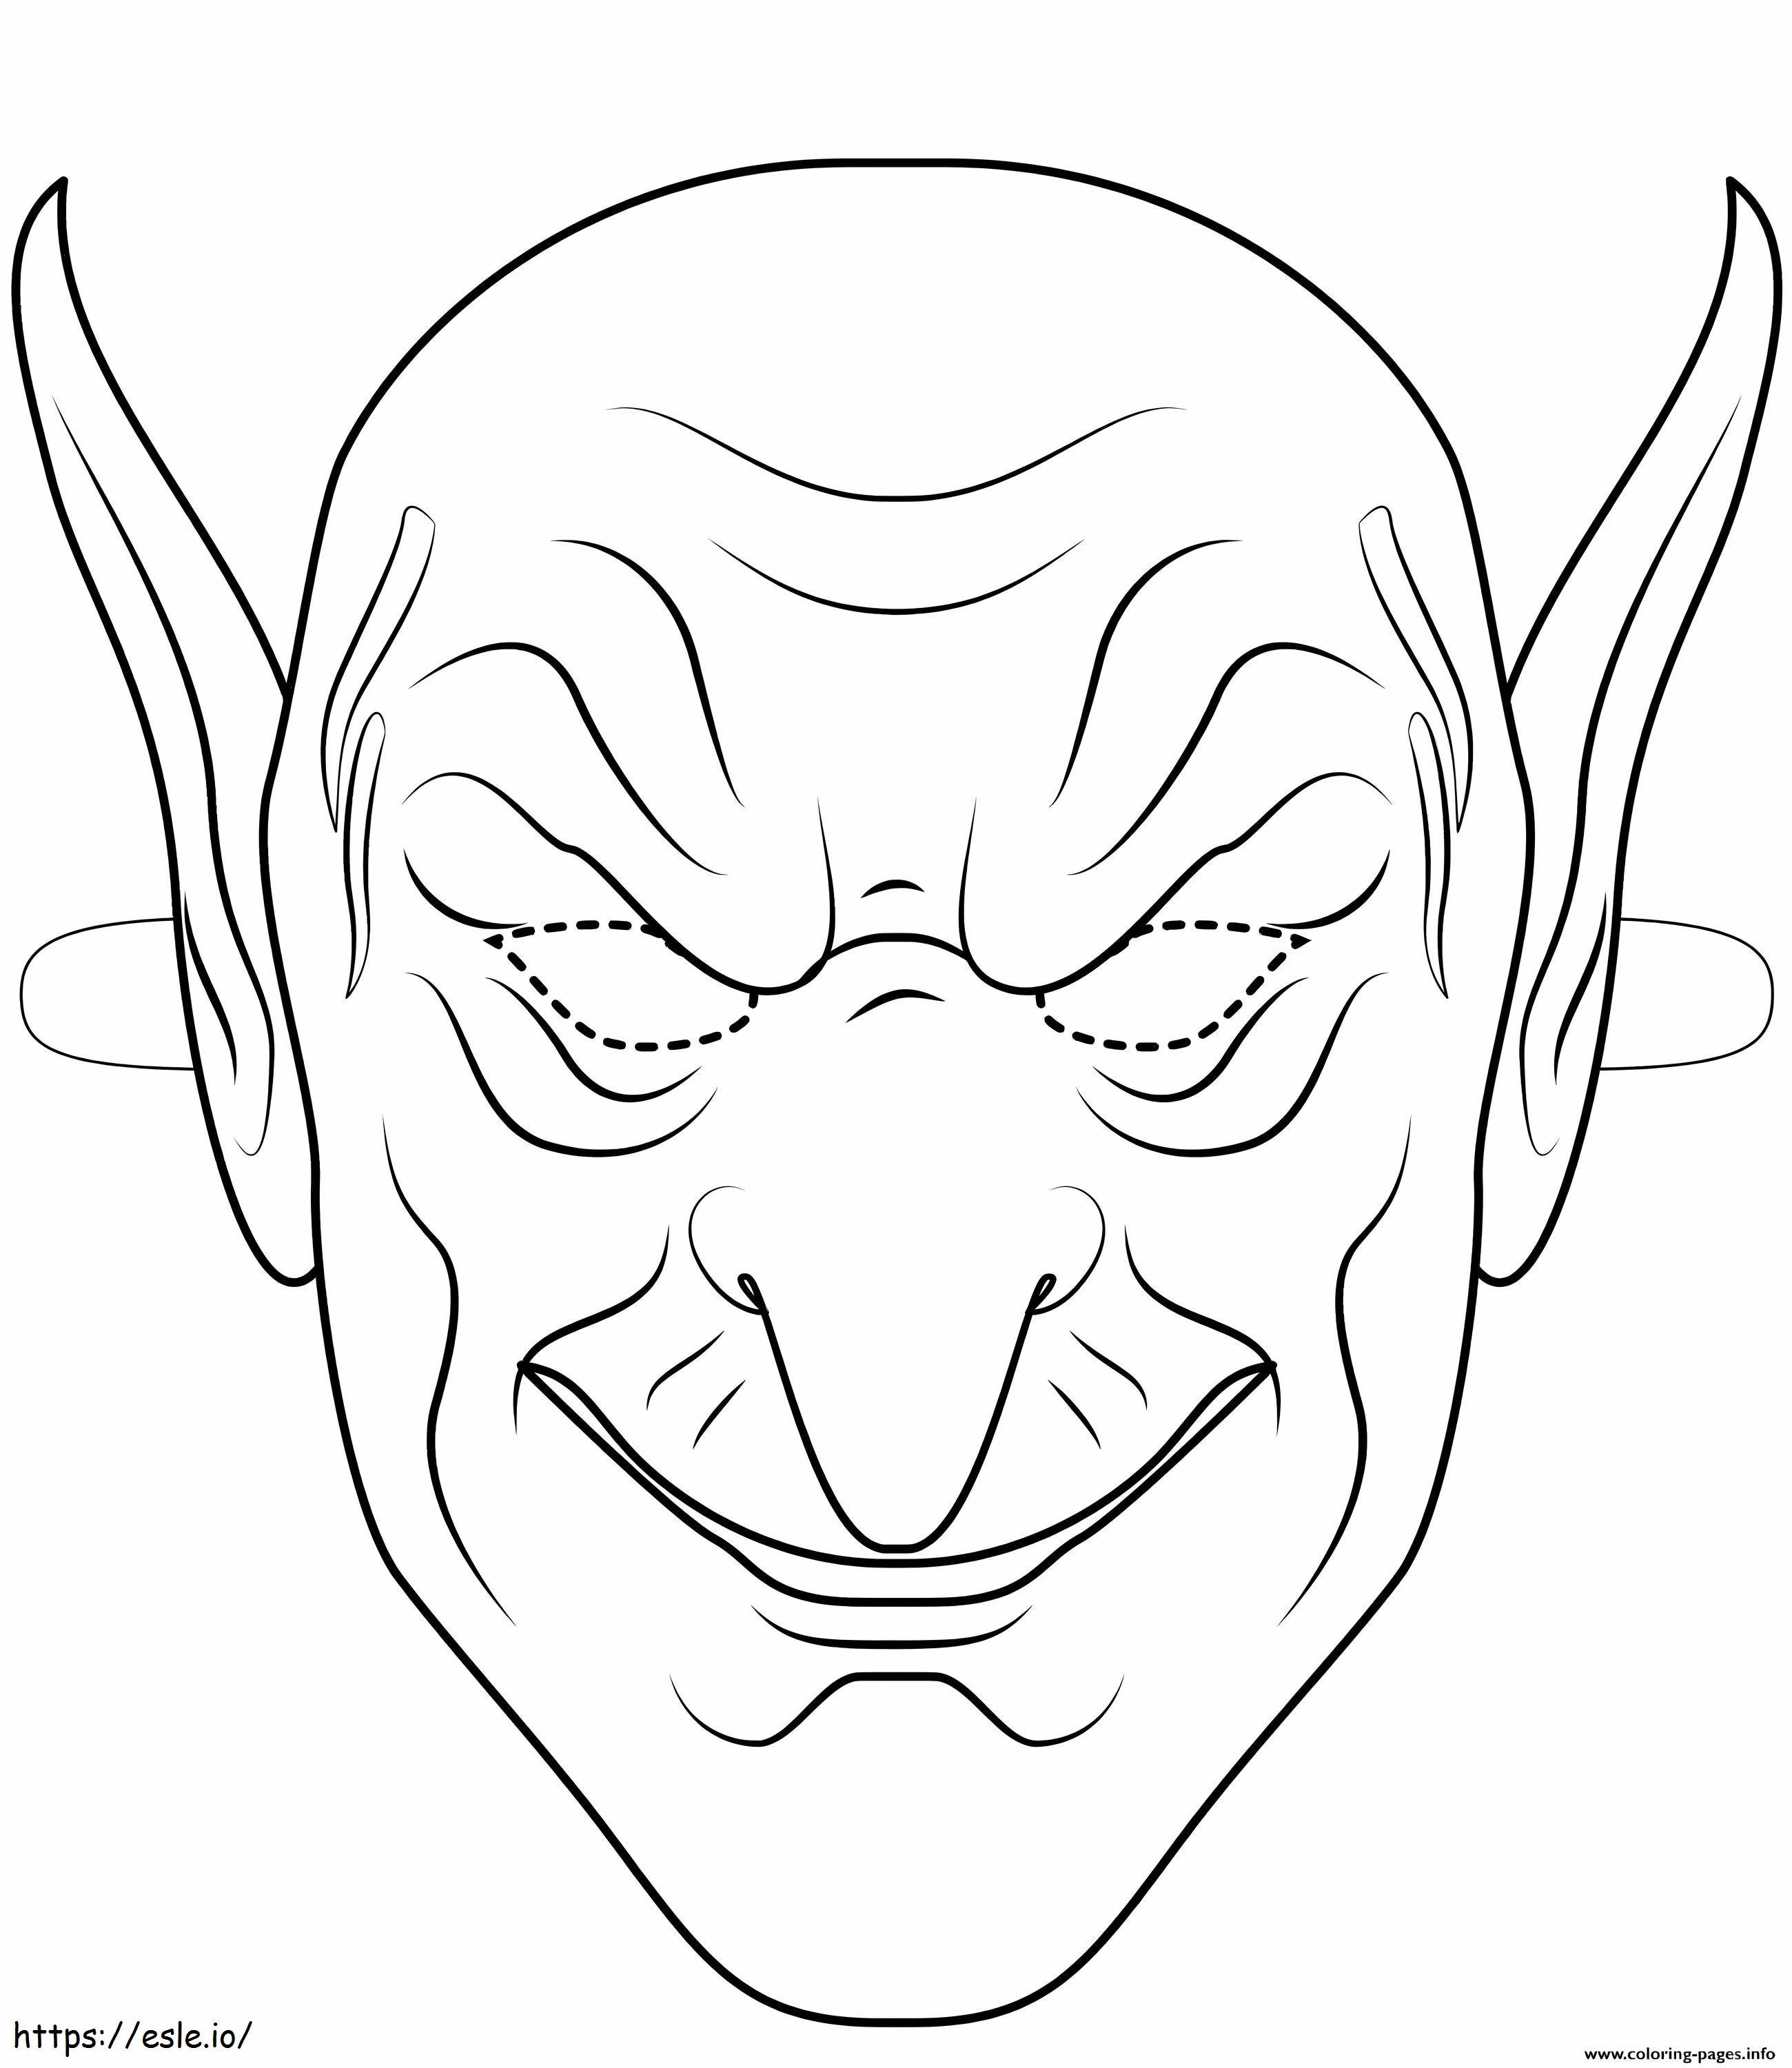 Goblin Mask coloring page